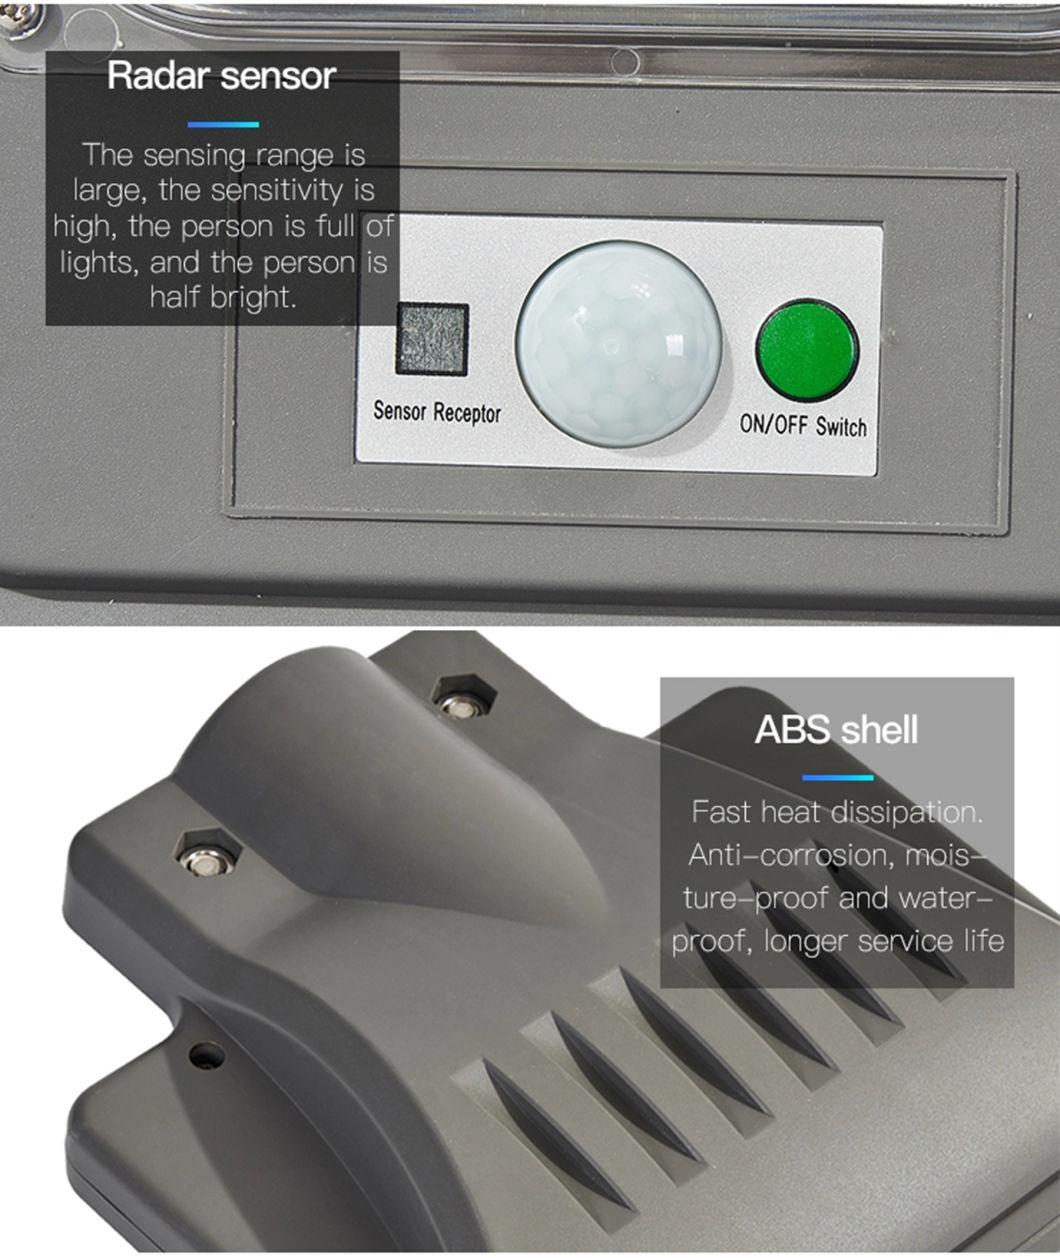 ABS SMD Outdoor IP65 Waterproof Integrated All in One Solar LED Street Light